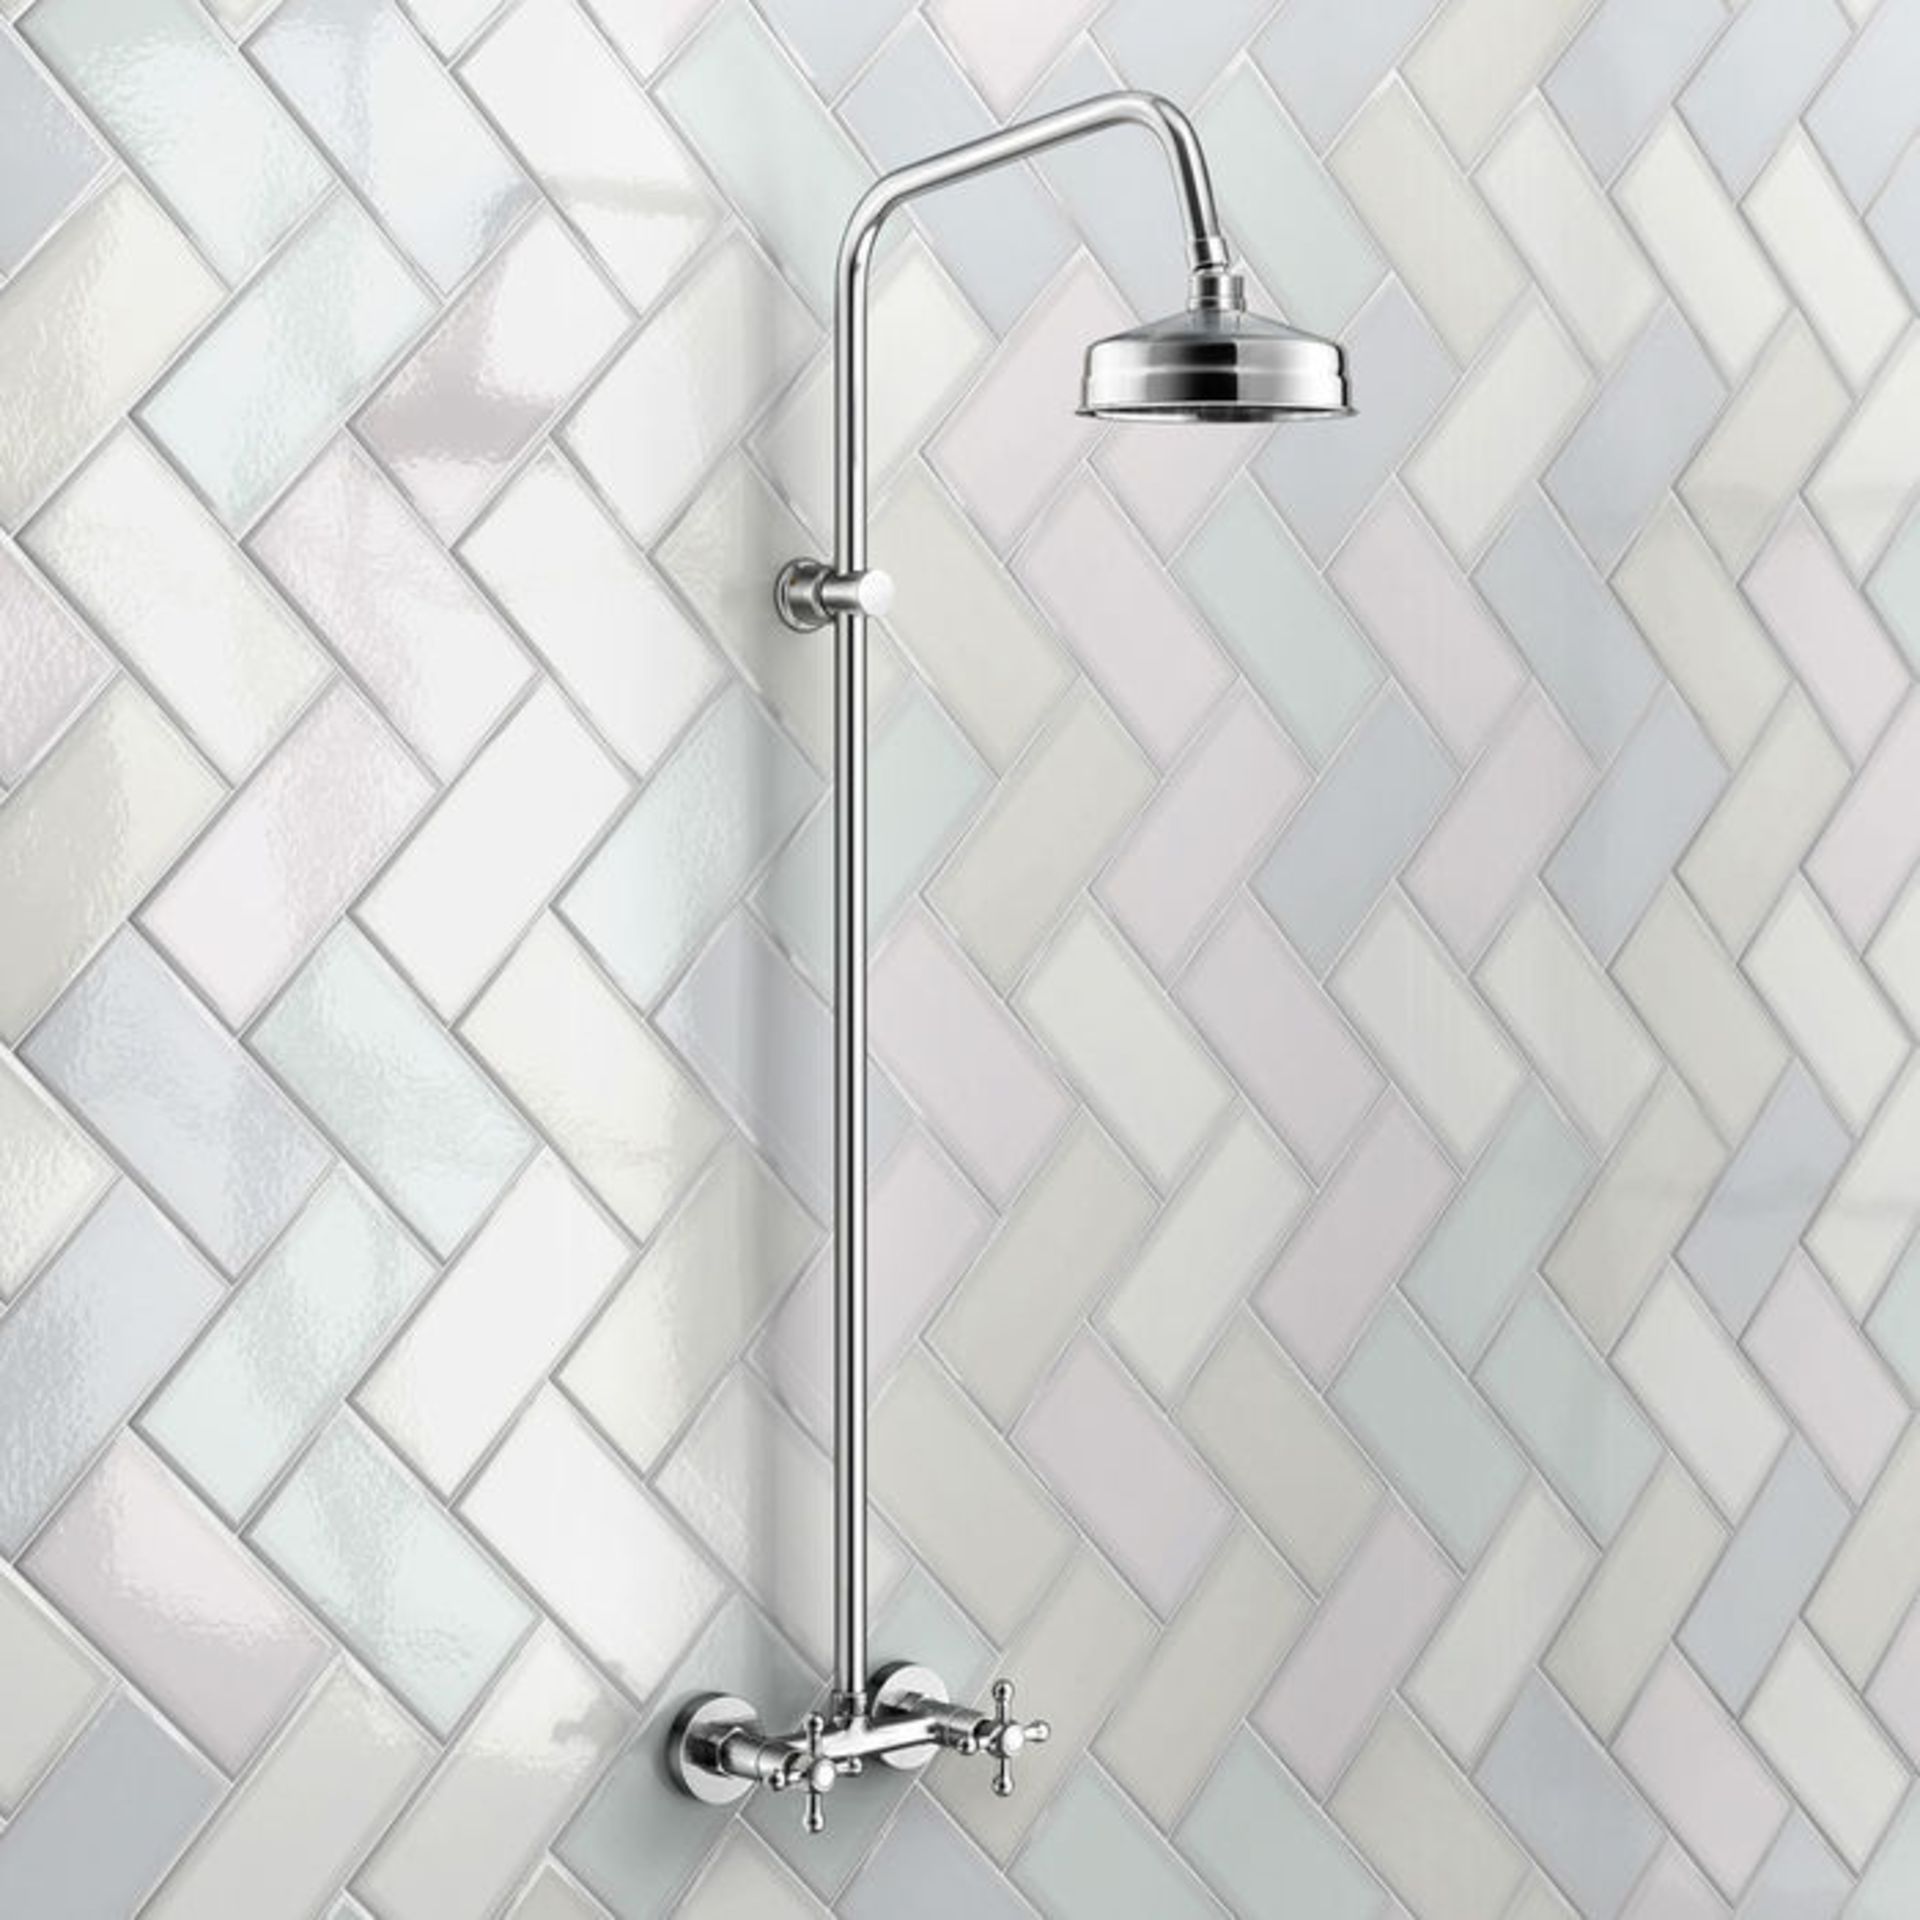 (OS27) Traditional Exposed Shower & Medium Head Exposed design makes for a statement piece - Image 3 of 3